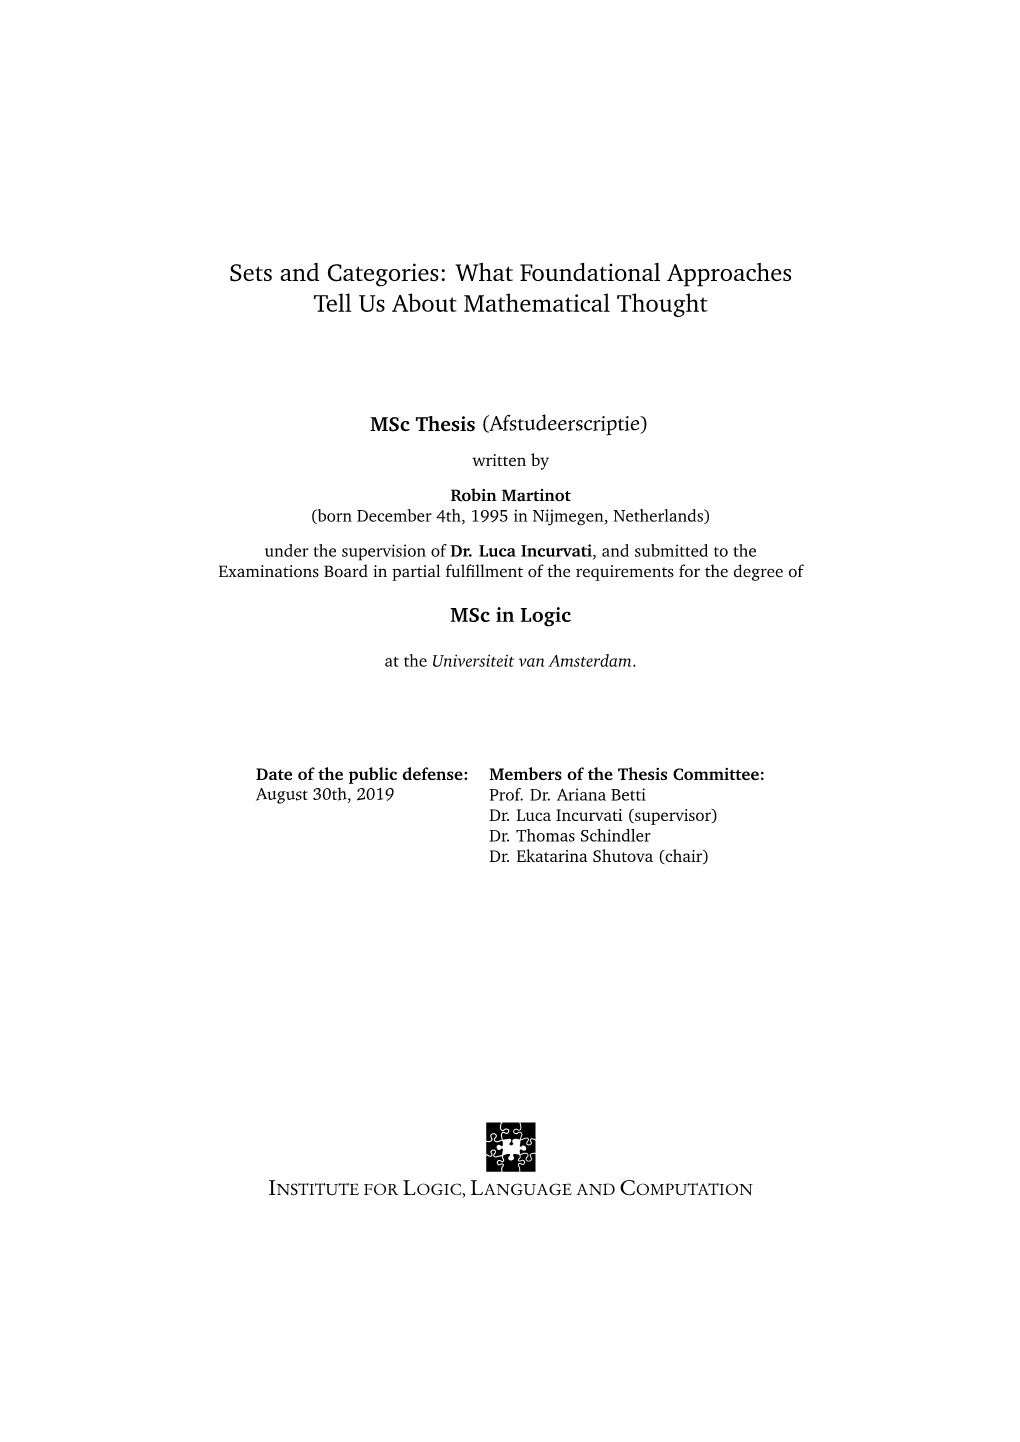 Sets and Categories: What Foundational Approaches Tell Us About Mathematical Thought